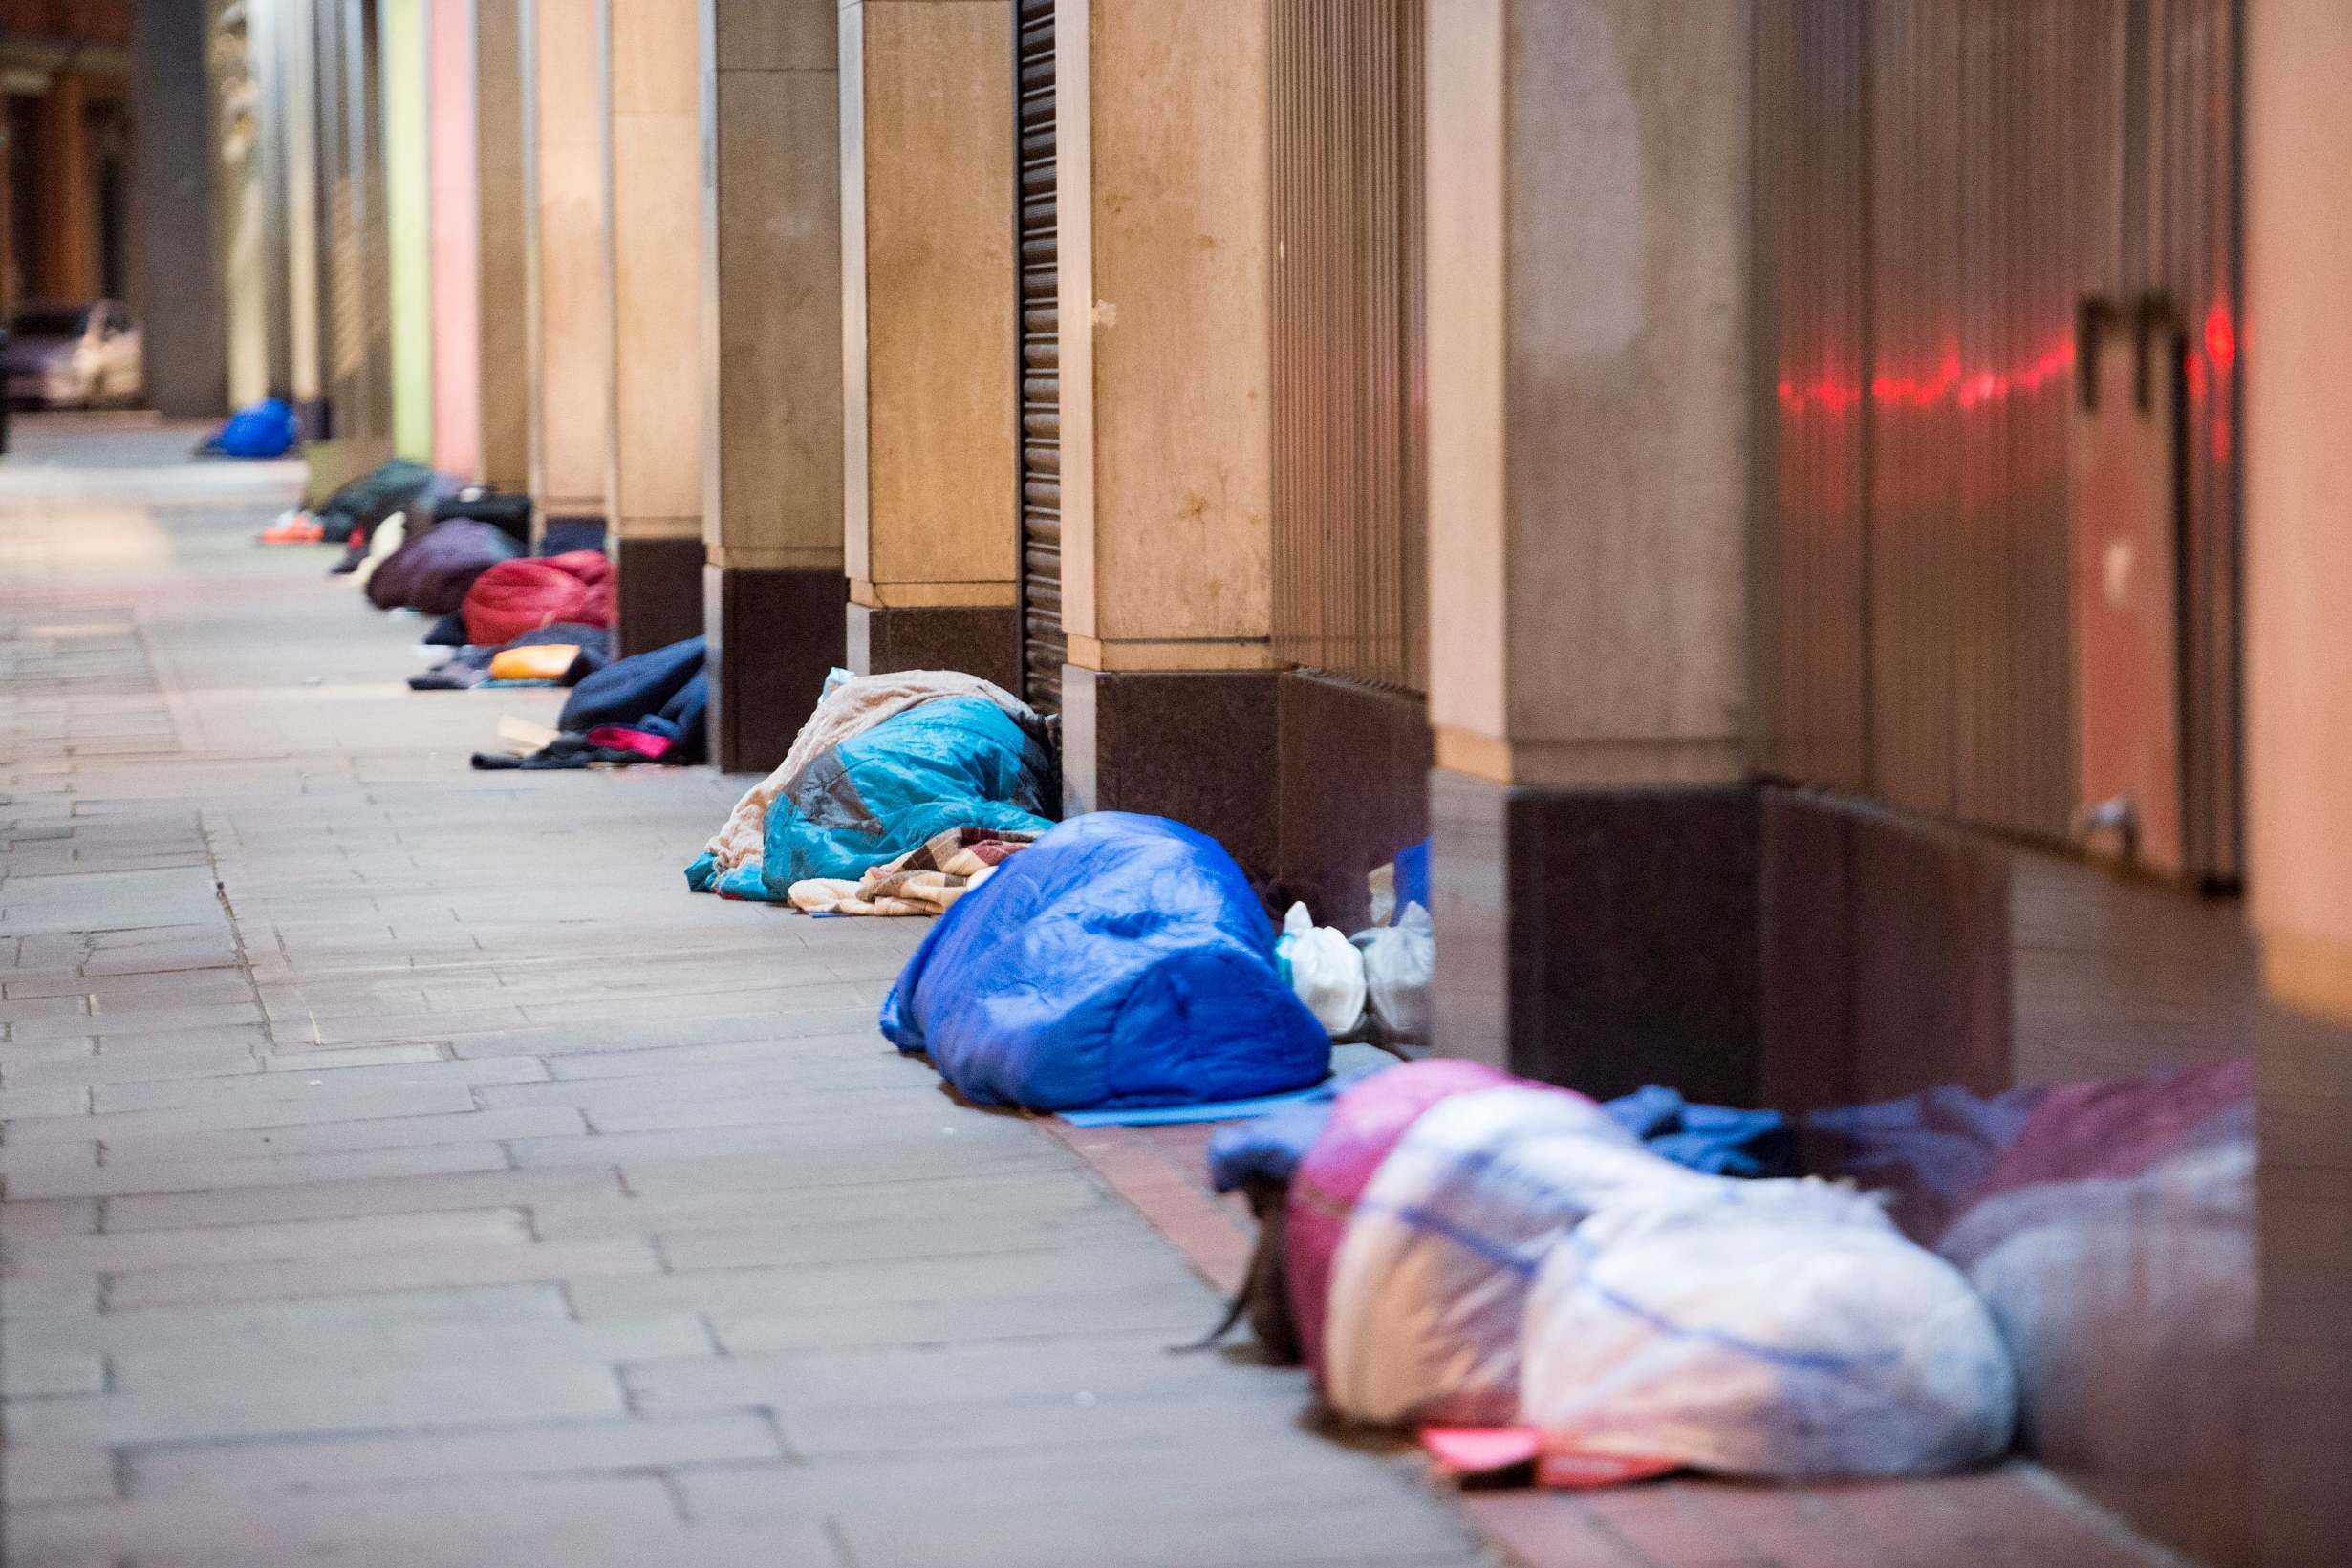 More than 170,000 people are estimated to be homeless in London (Jeremy Selwyn)